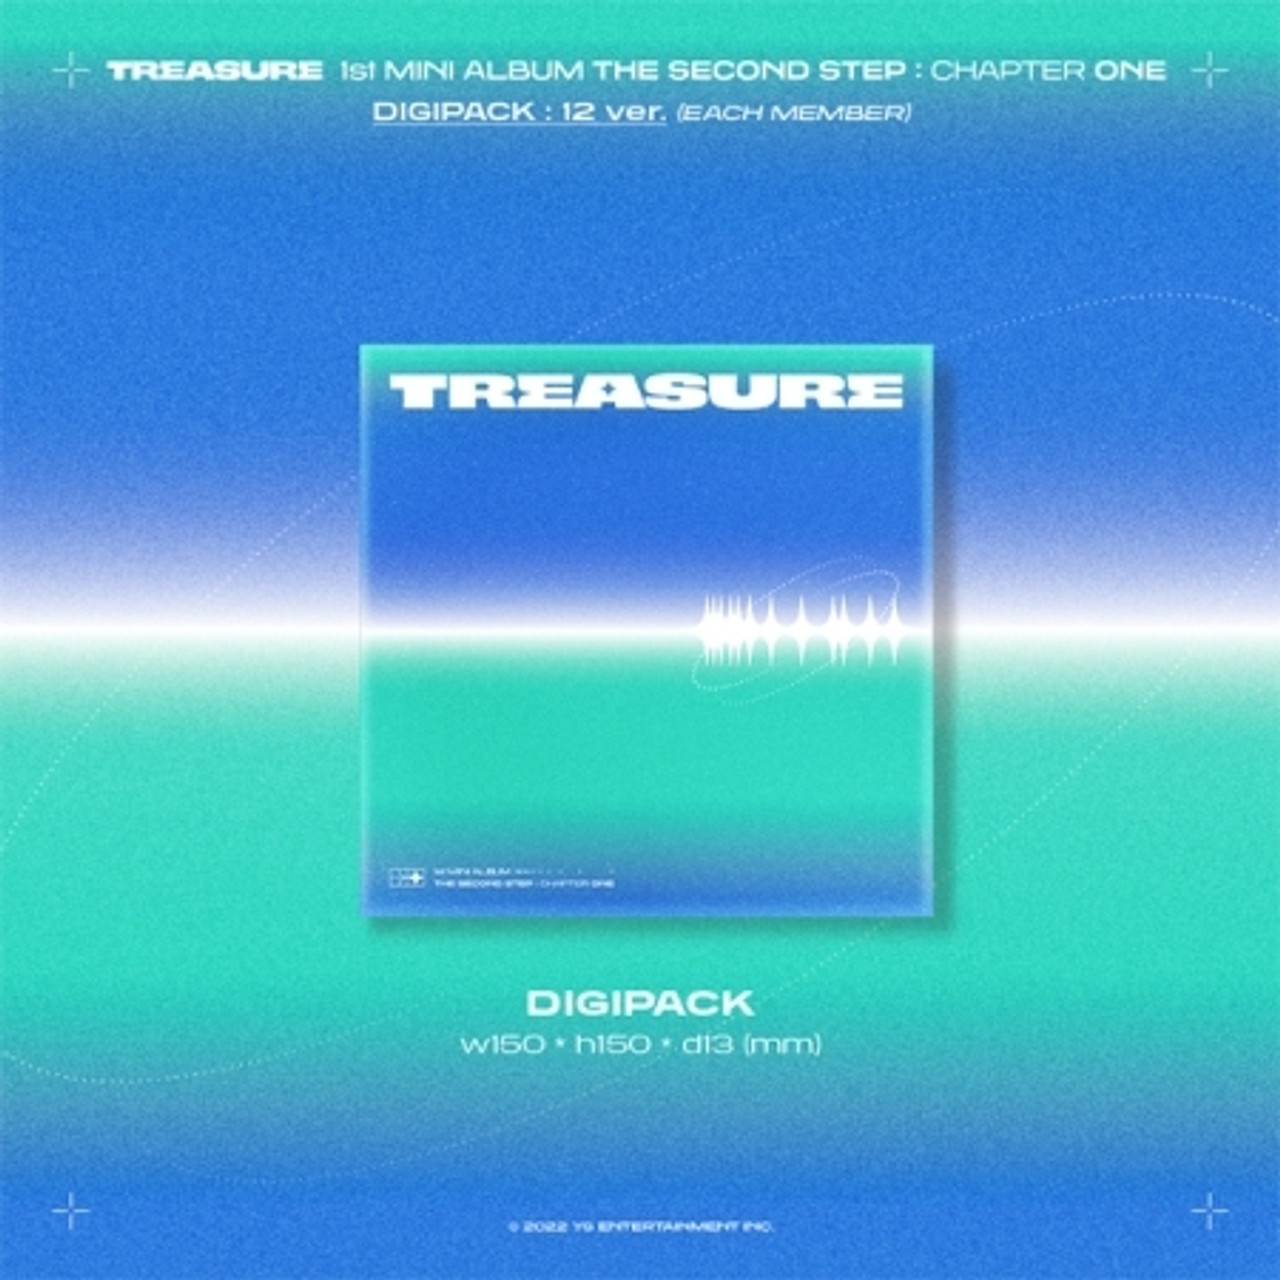  TREASURE  1st MINI ALBUM THE SECOND STEP   CHAPTER ONE DIGIPACK Random ver  and benefit with weverse shop gift